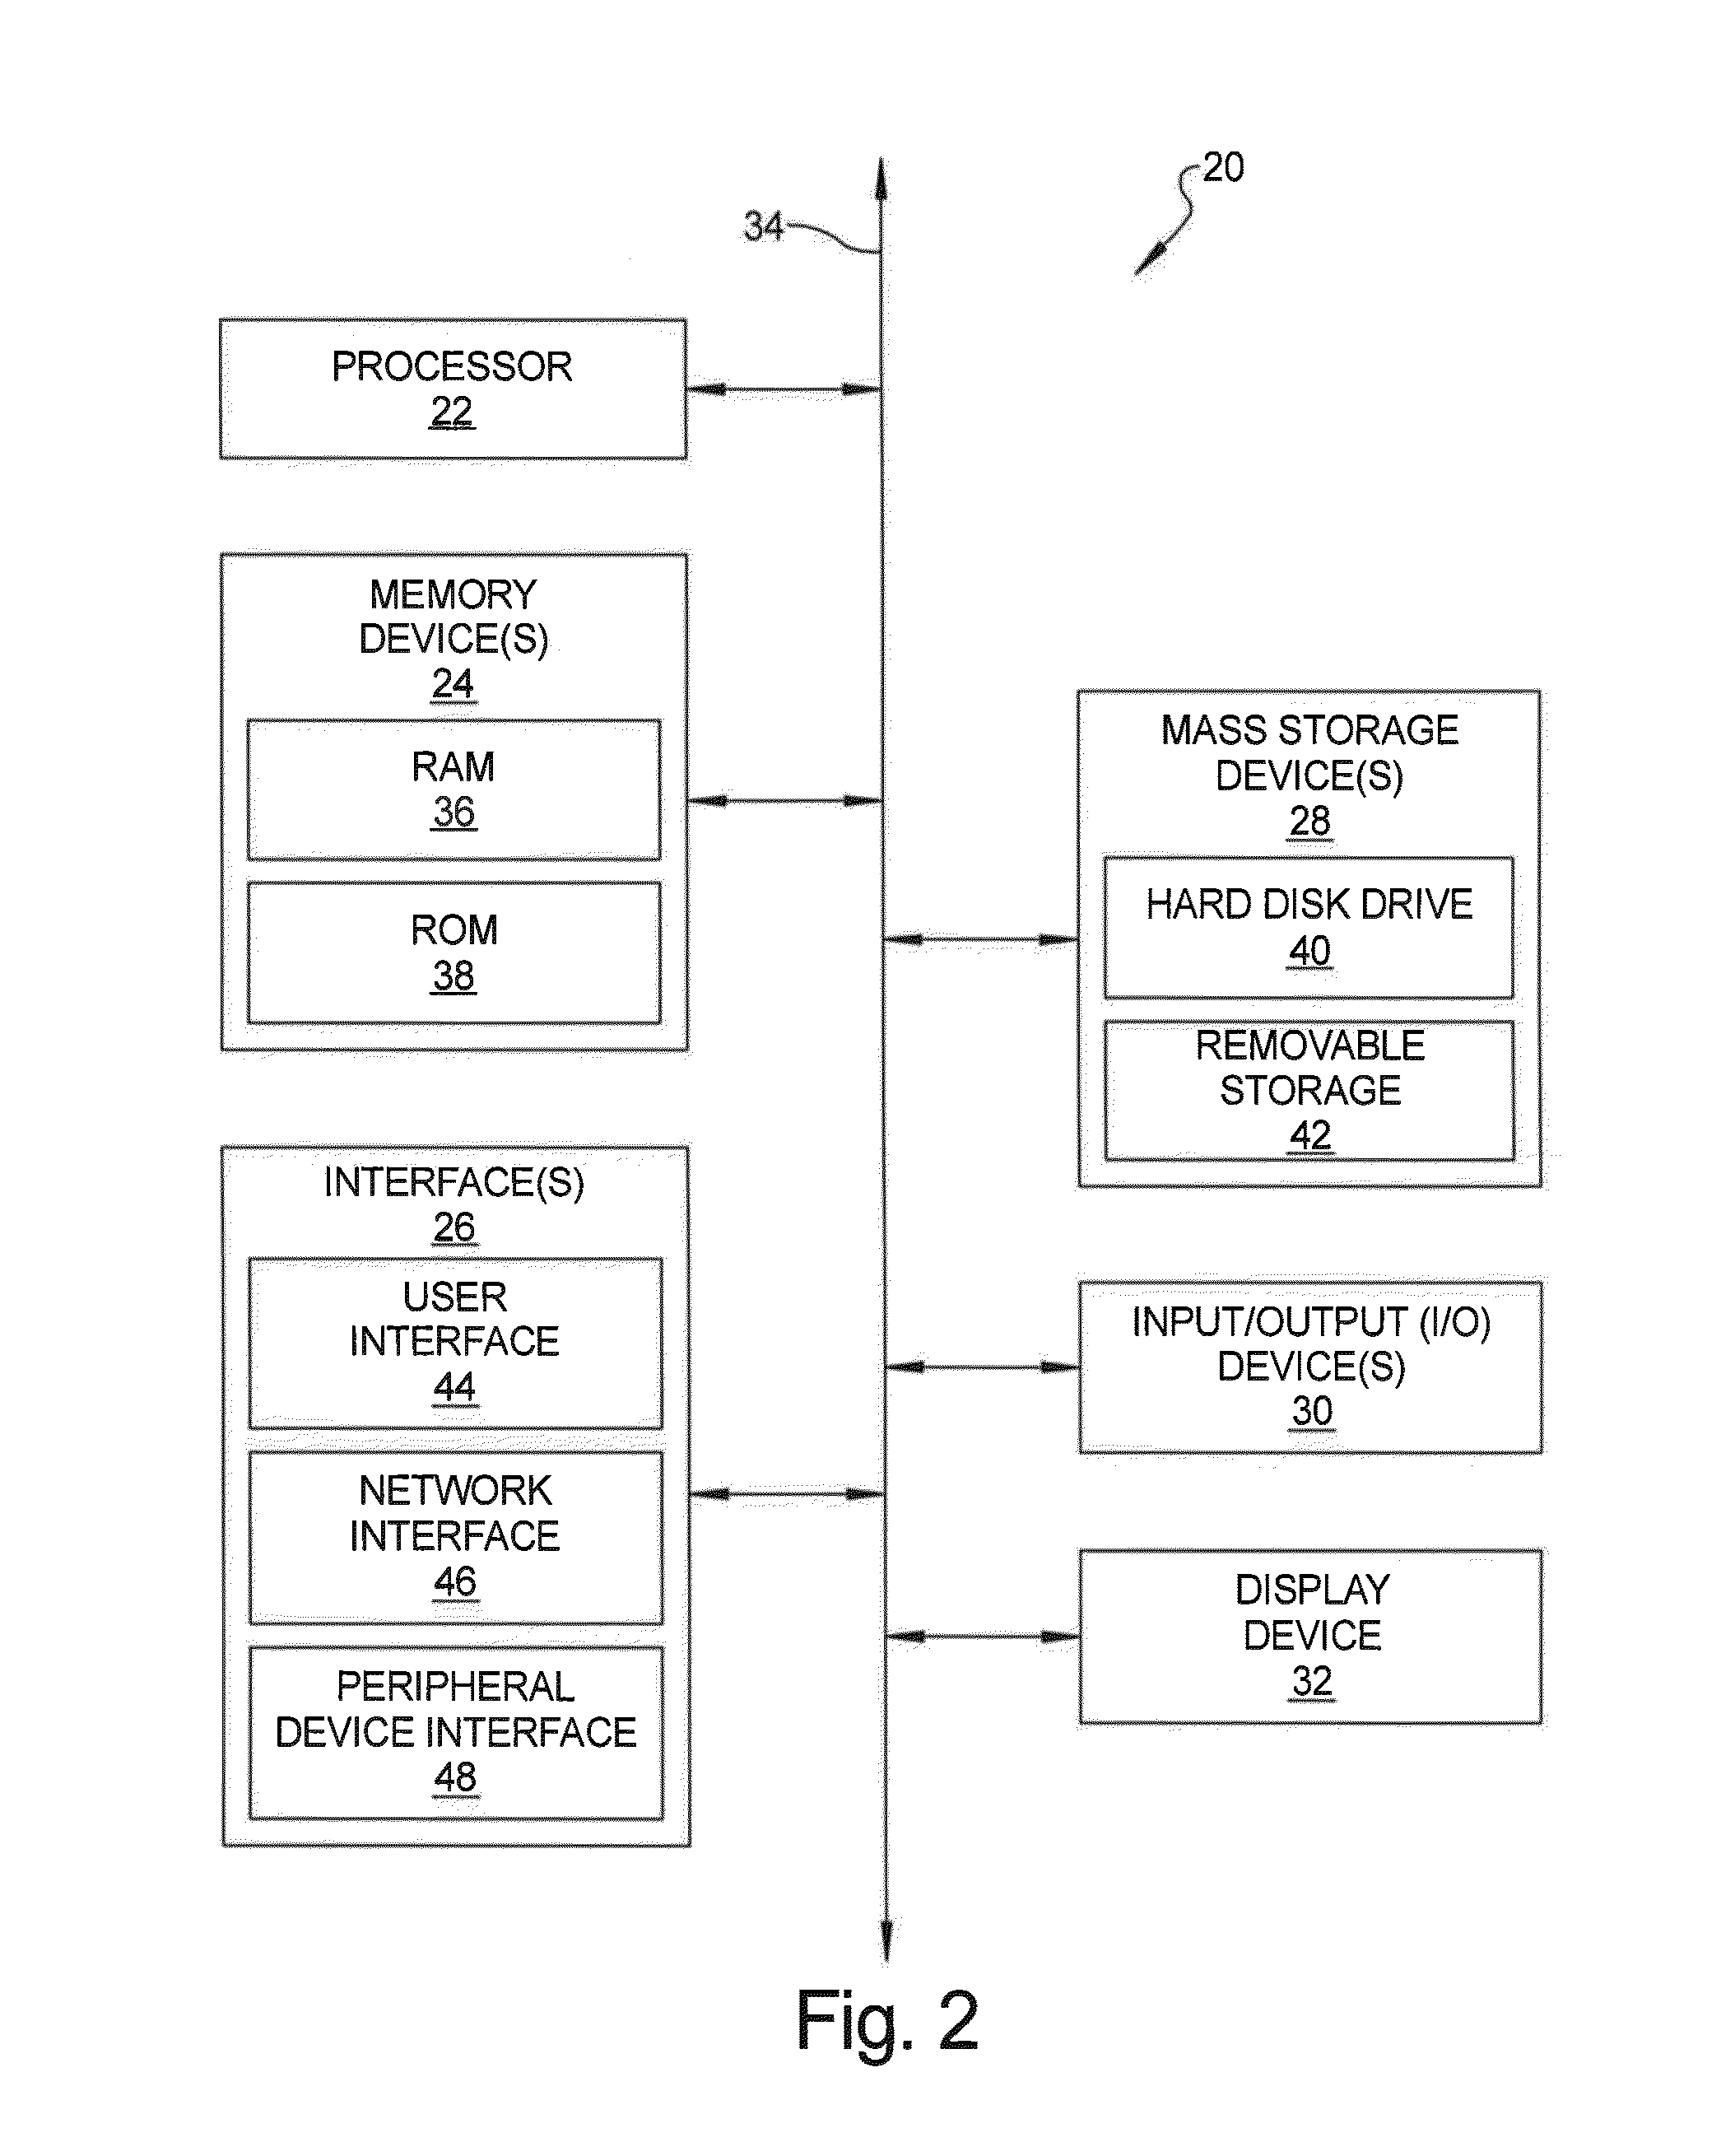 System for optimizing sponsored product listings for seller performance in an e-commerce marketplace and method of using same